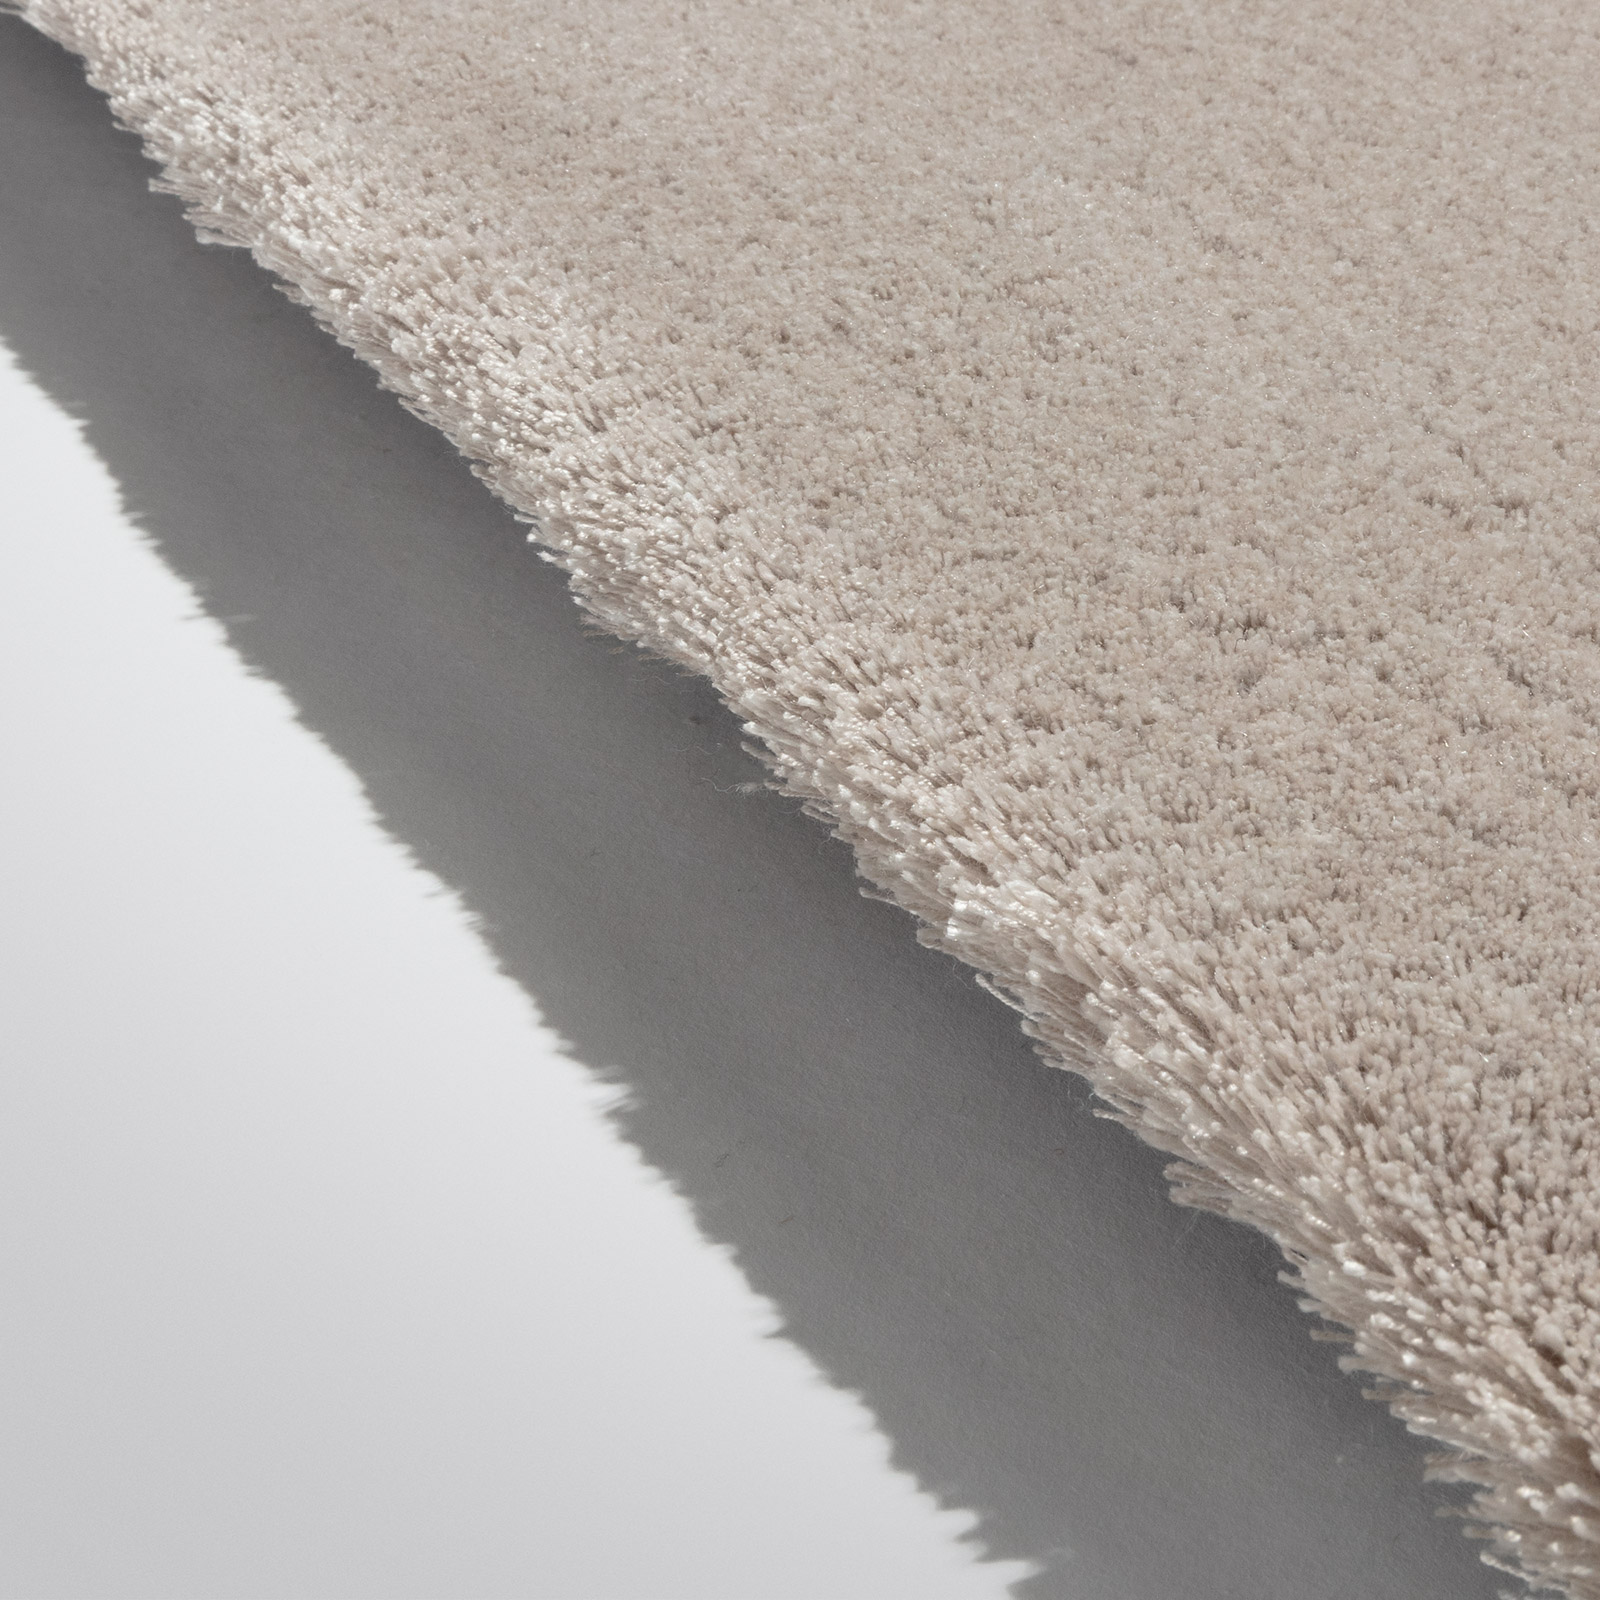 Useful instructions for cleaning and best maintaining your carpet